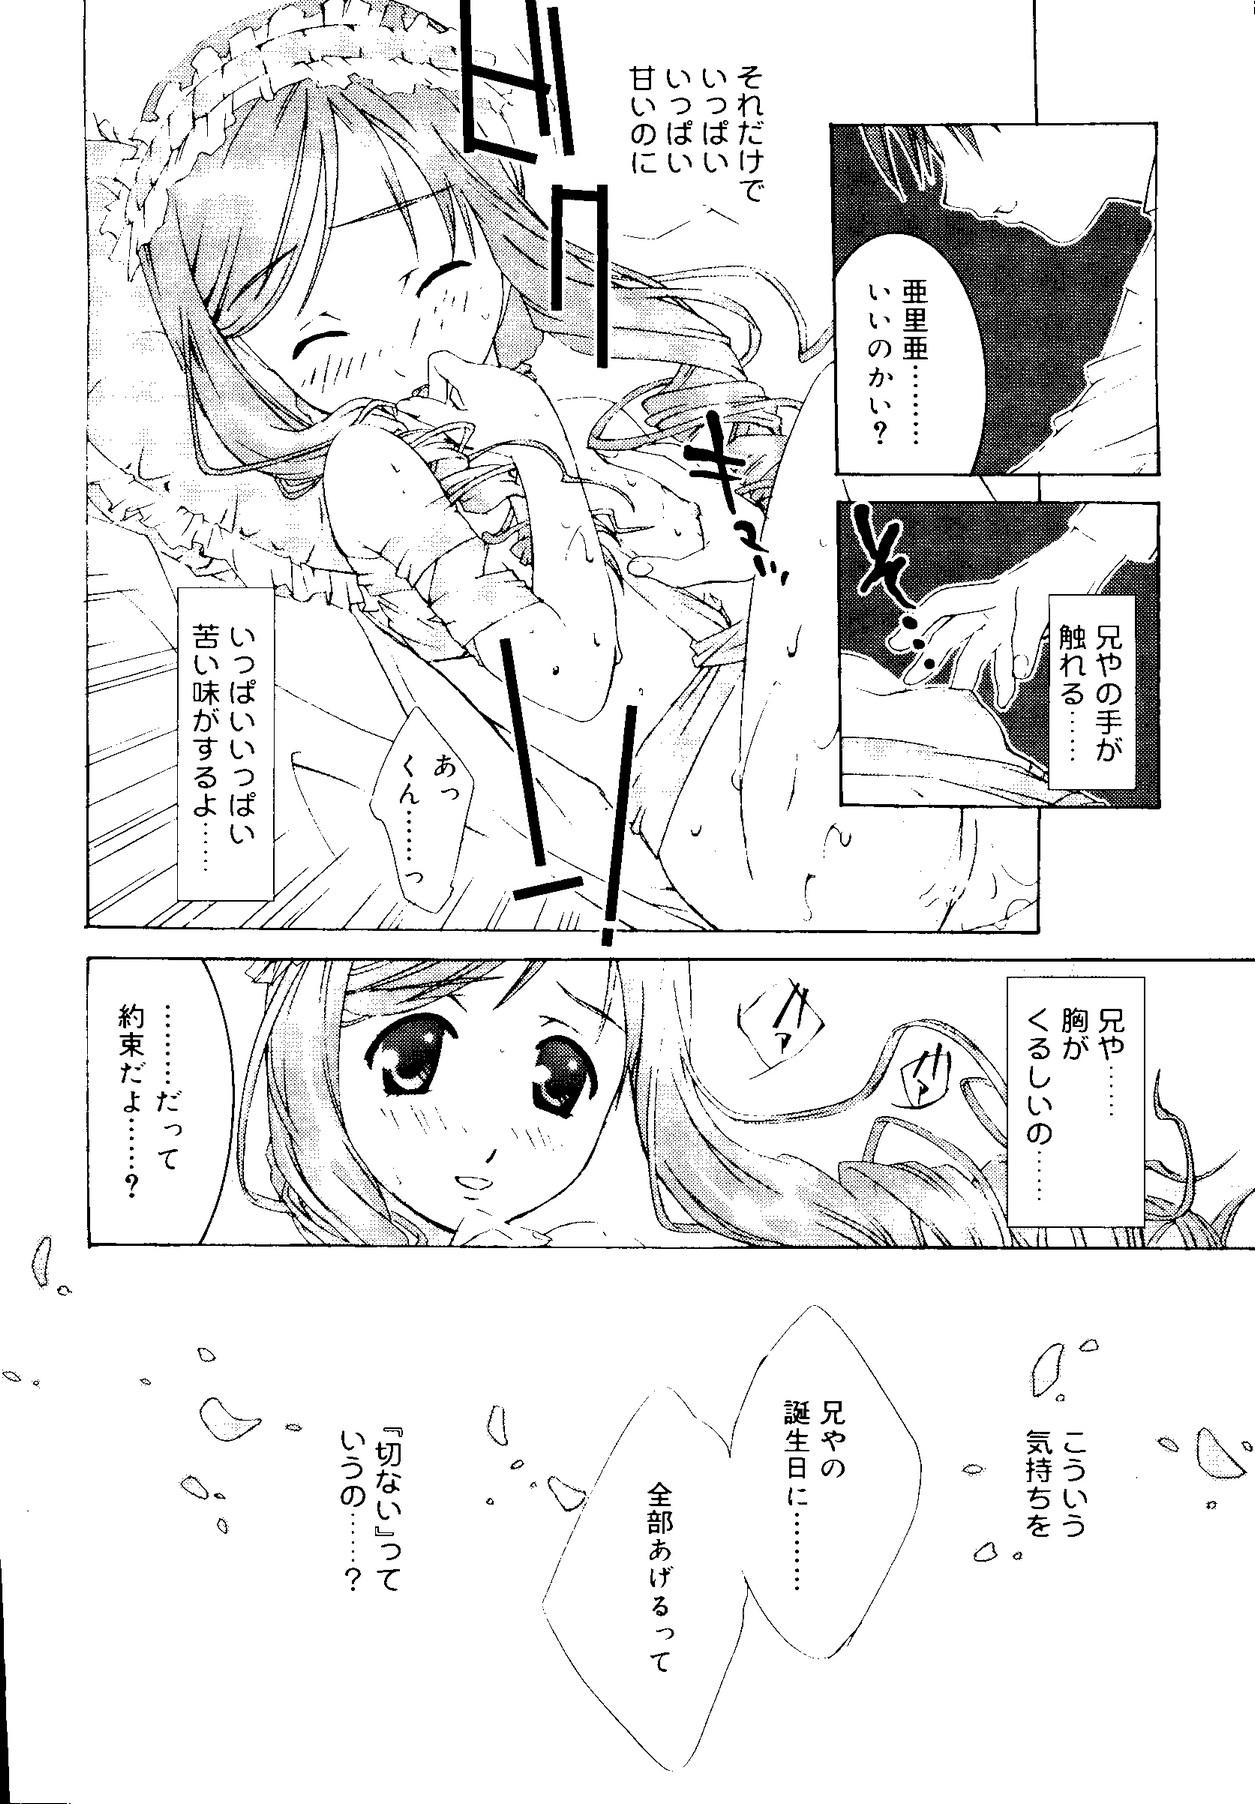 Dom Rabukore - Lovely Collection Vol. 3 - Ojamajo doremi Sister princess Onegai teacher Chobits Sex Toy - Page 6